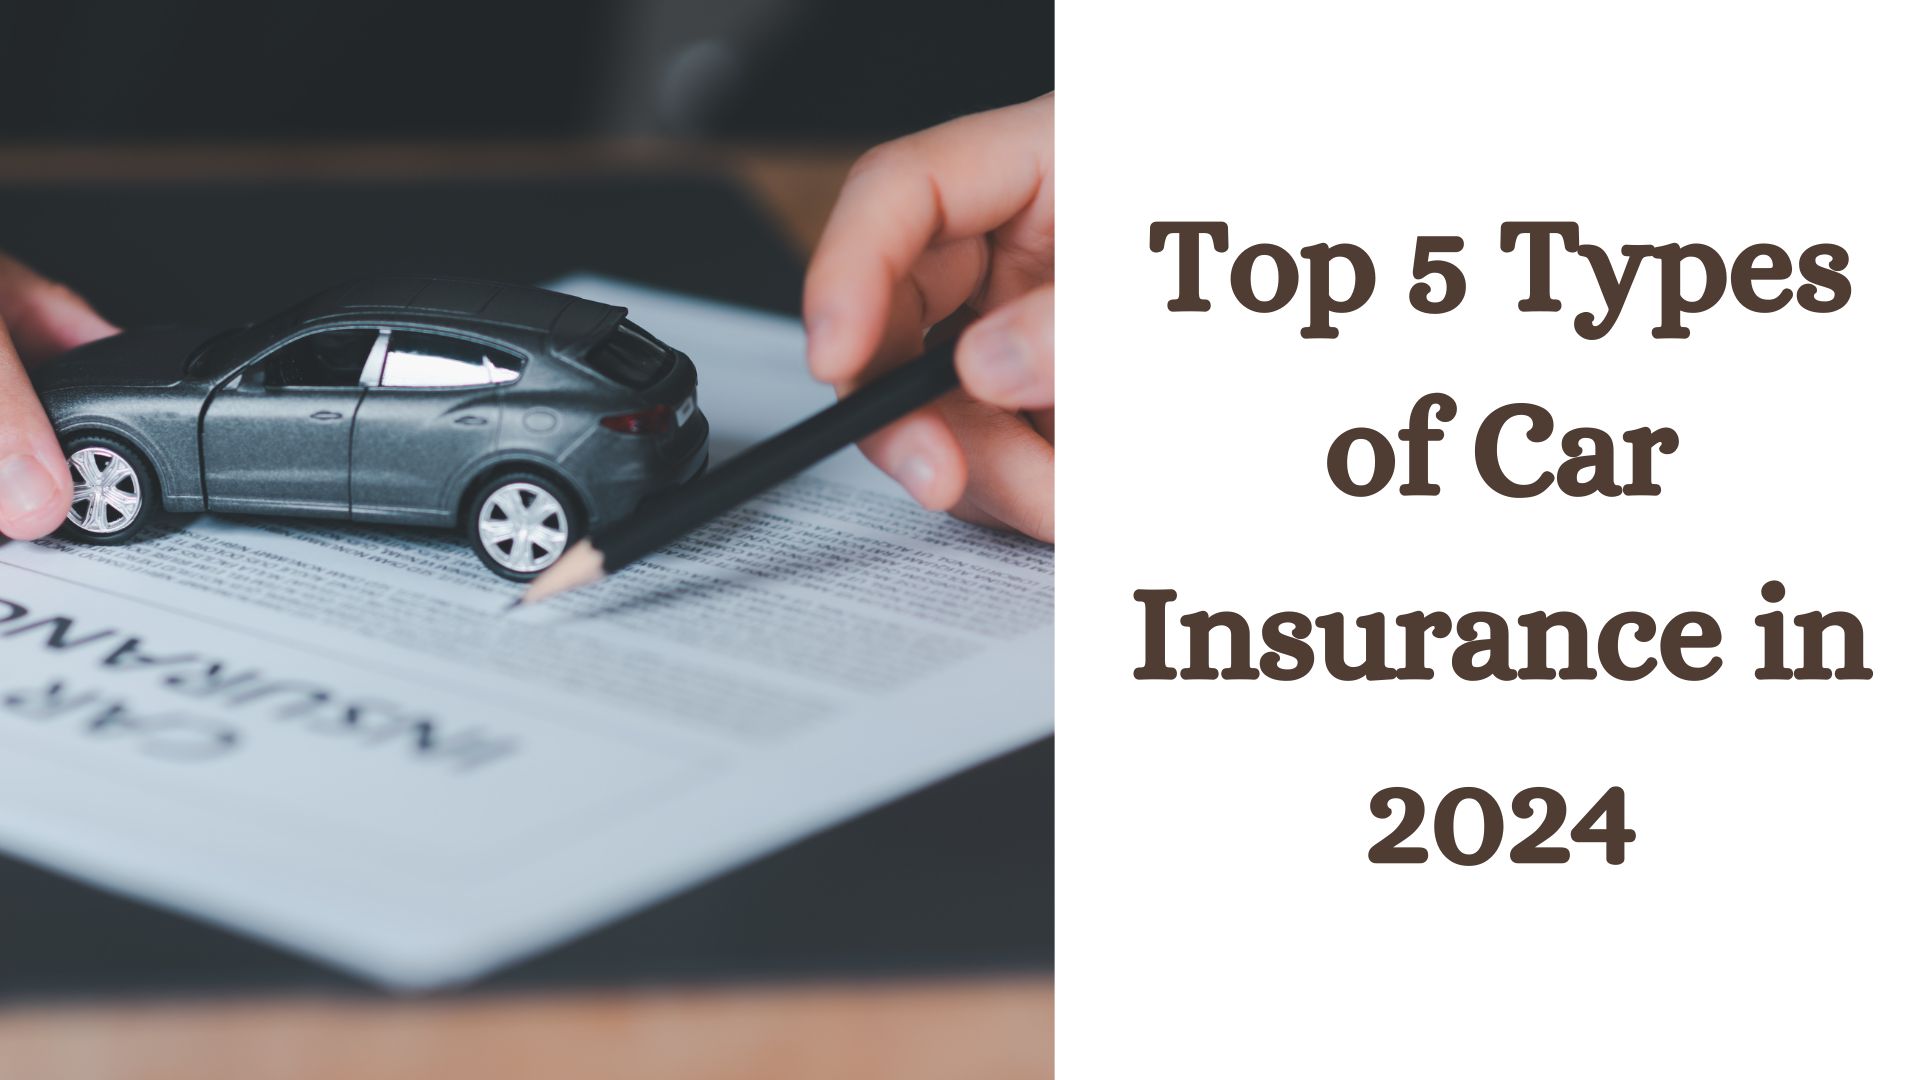 Top 5 Types of Car Insurance in 2024